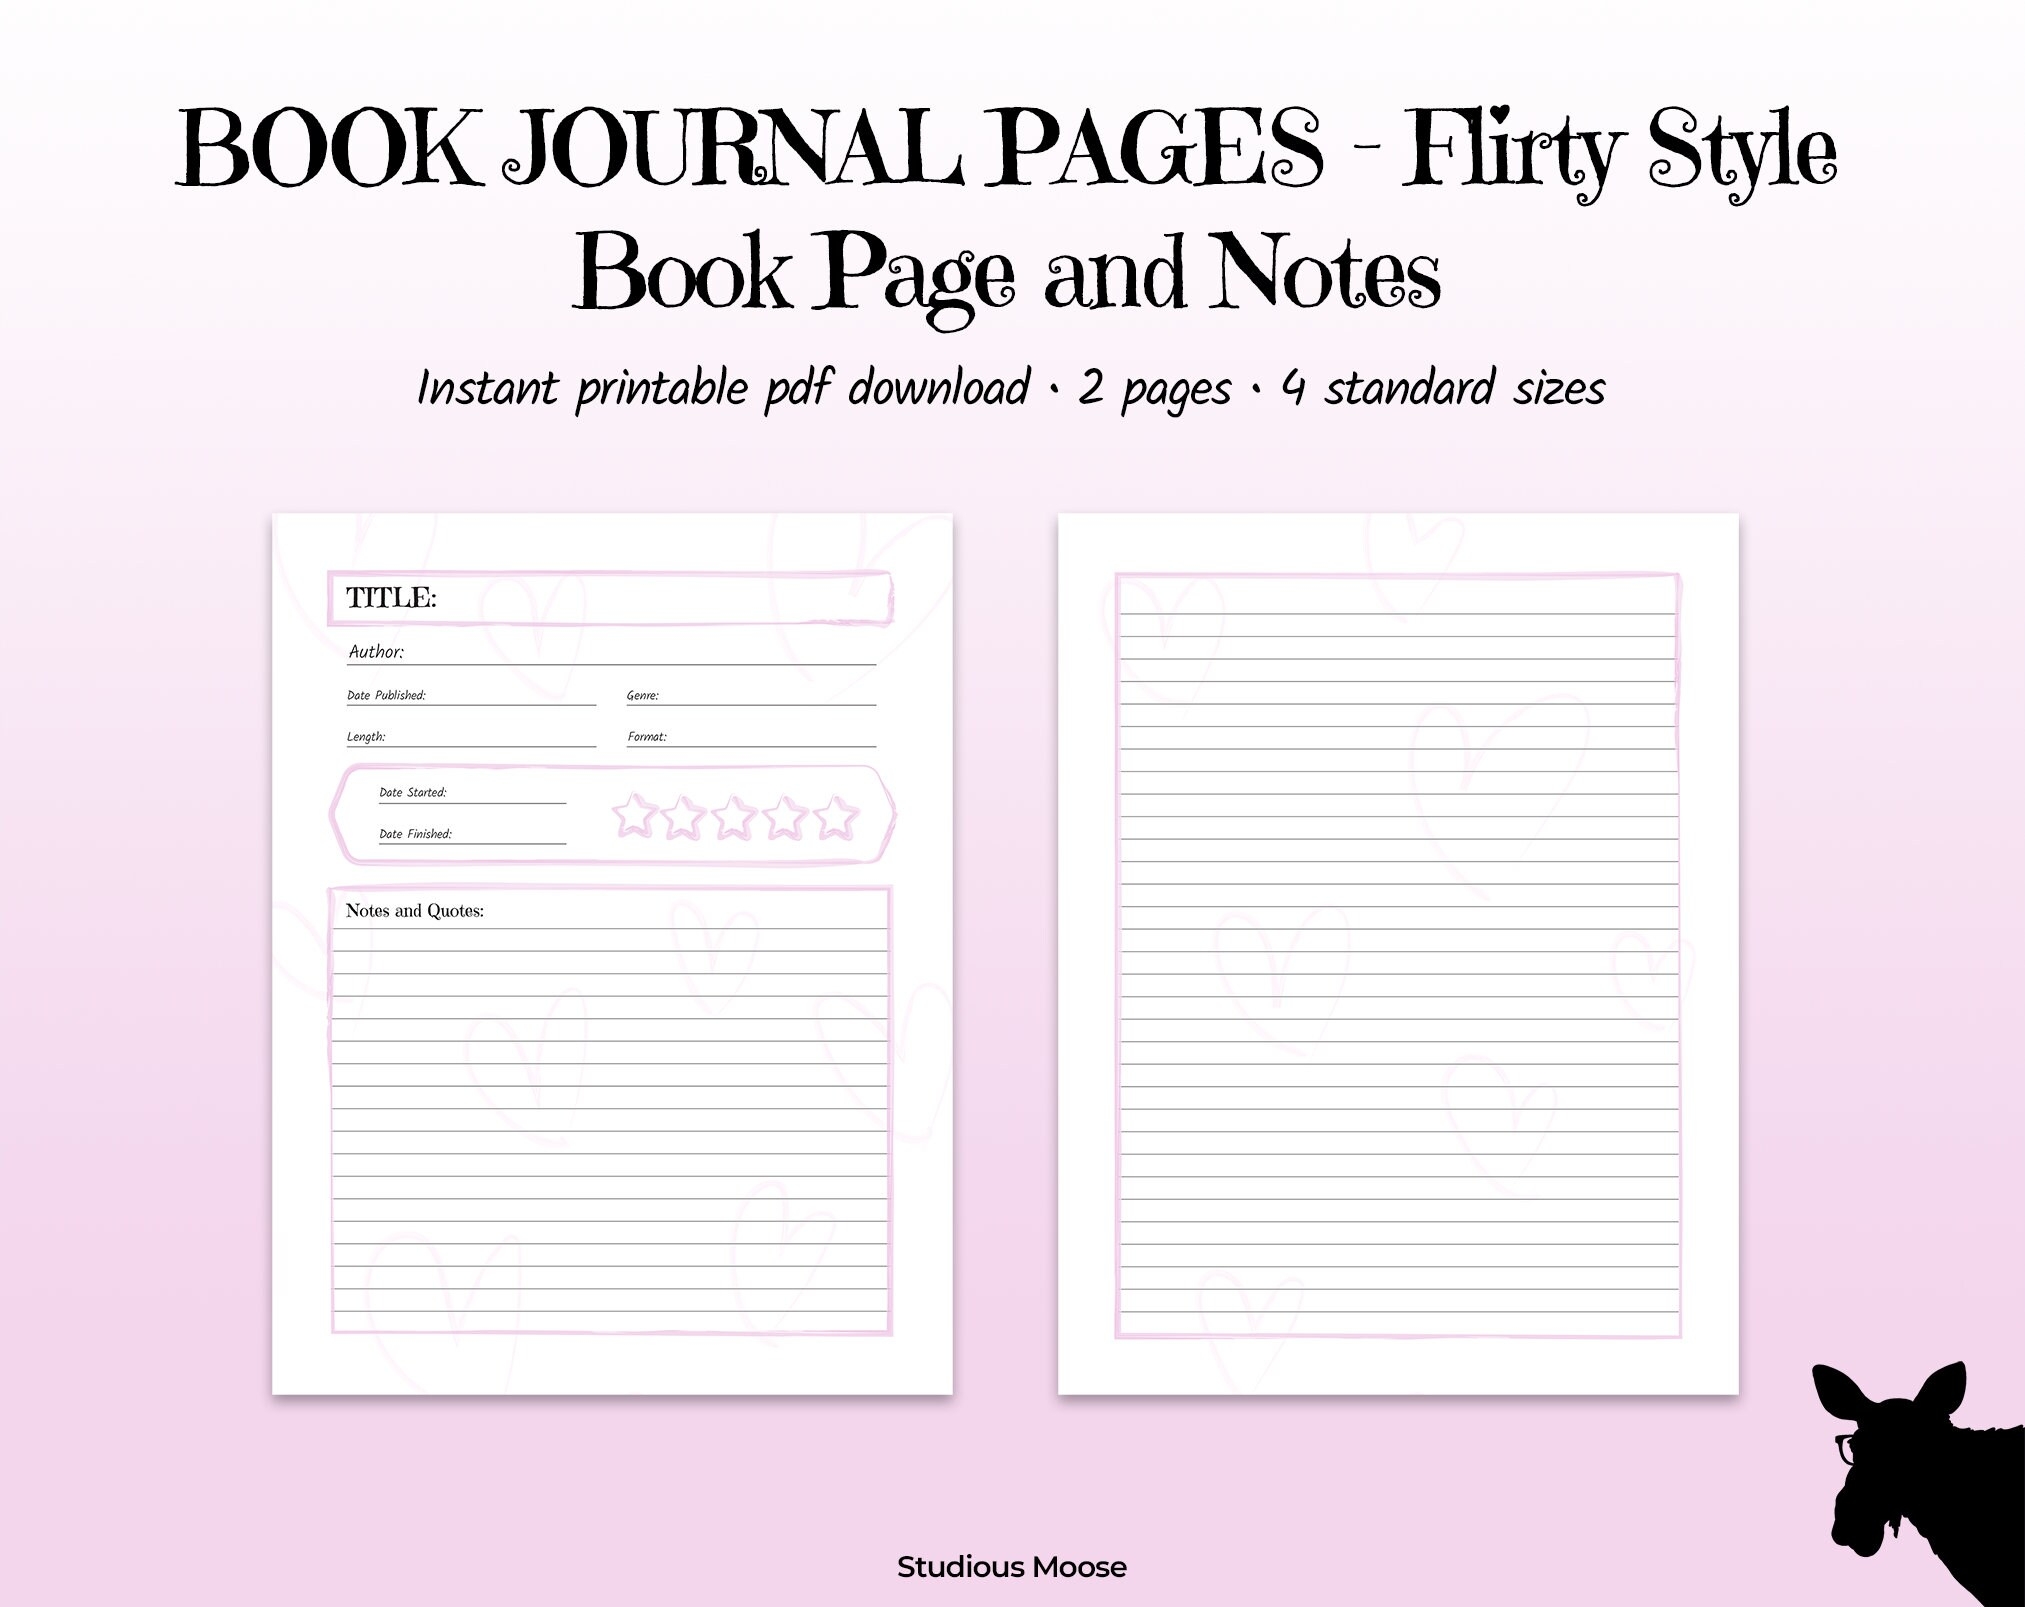 Printable Book Journal Page Flirty Style A Digital PDF Download To Take Notes On Books You ve Read Reading Journal Page Etsy - Free Printable Book Pages